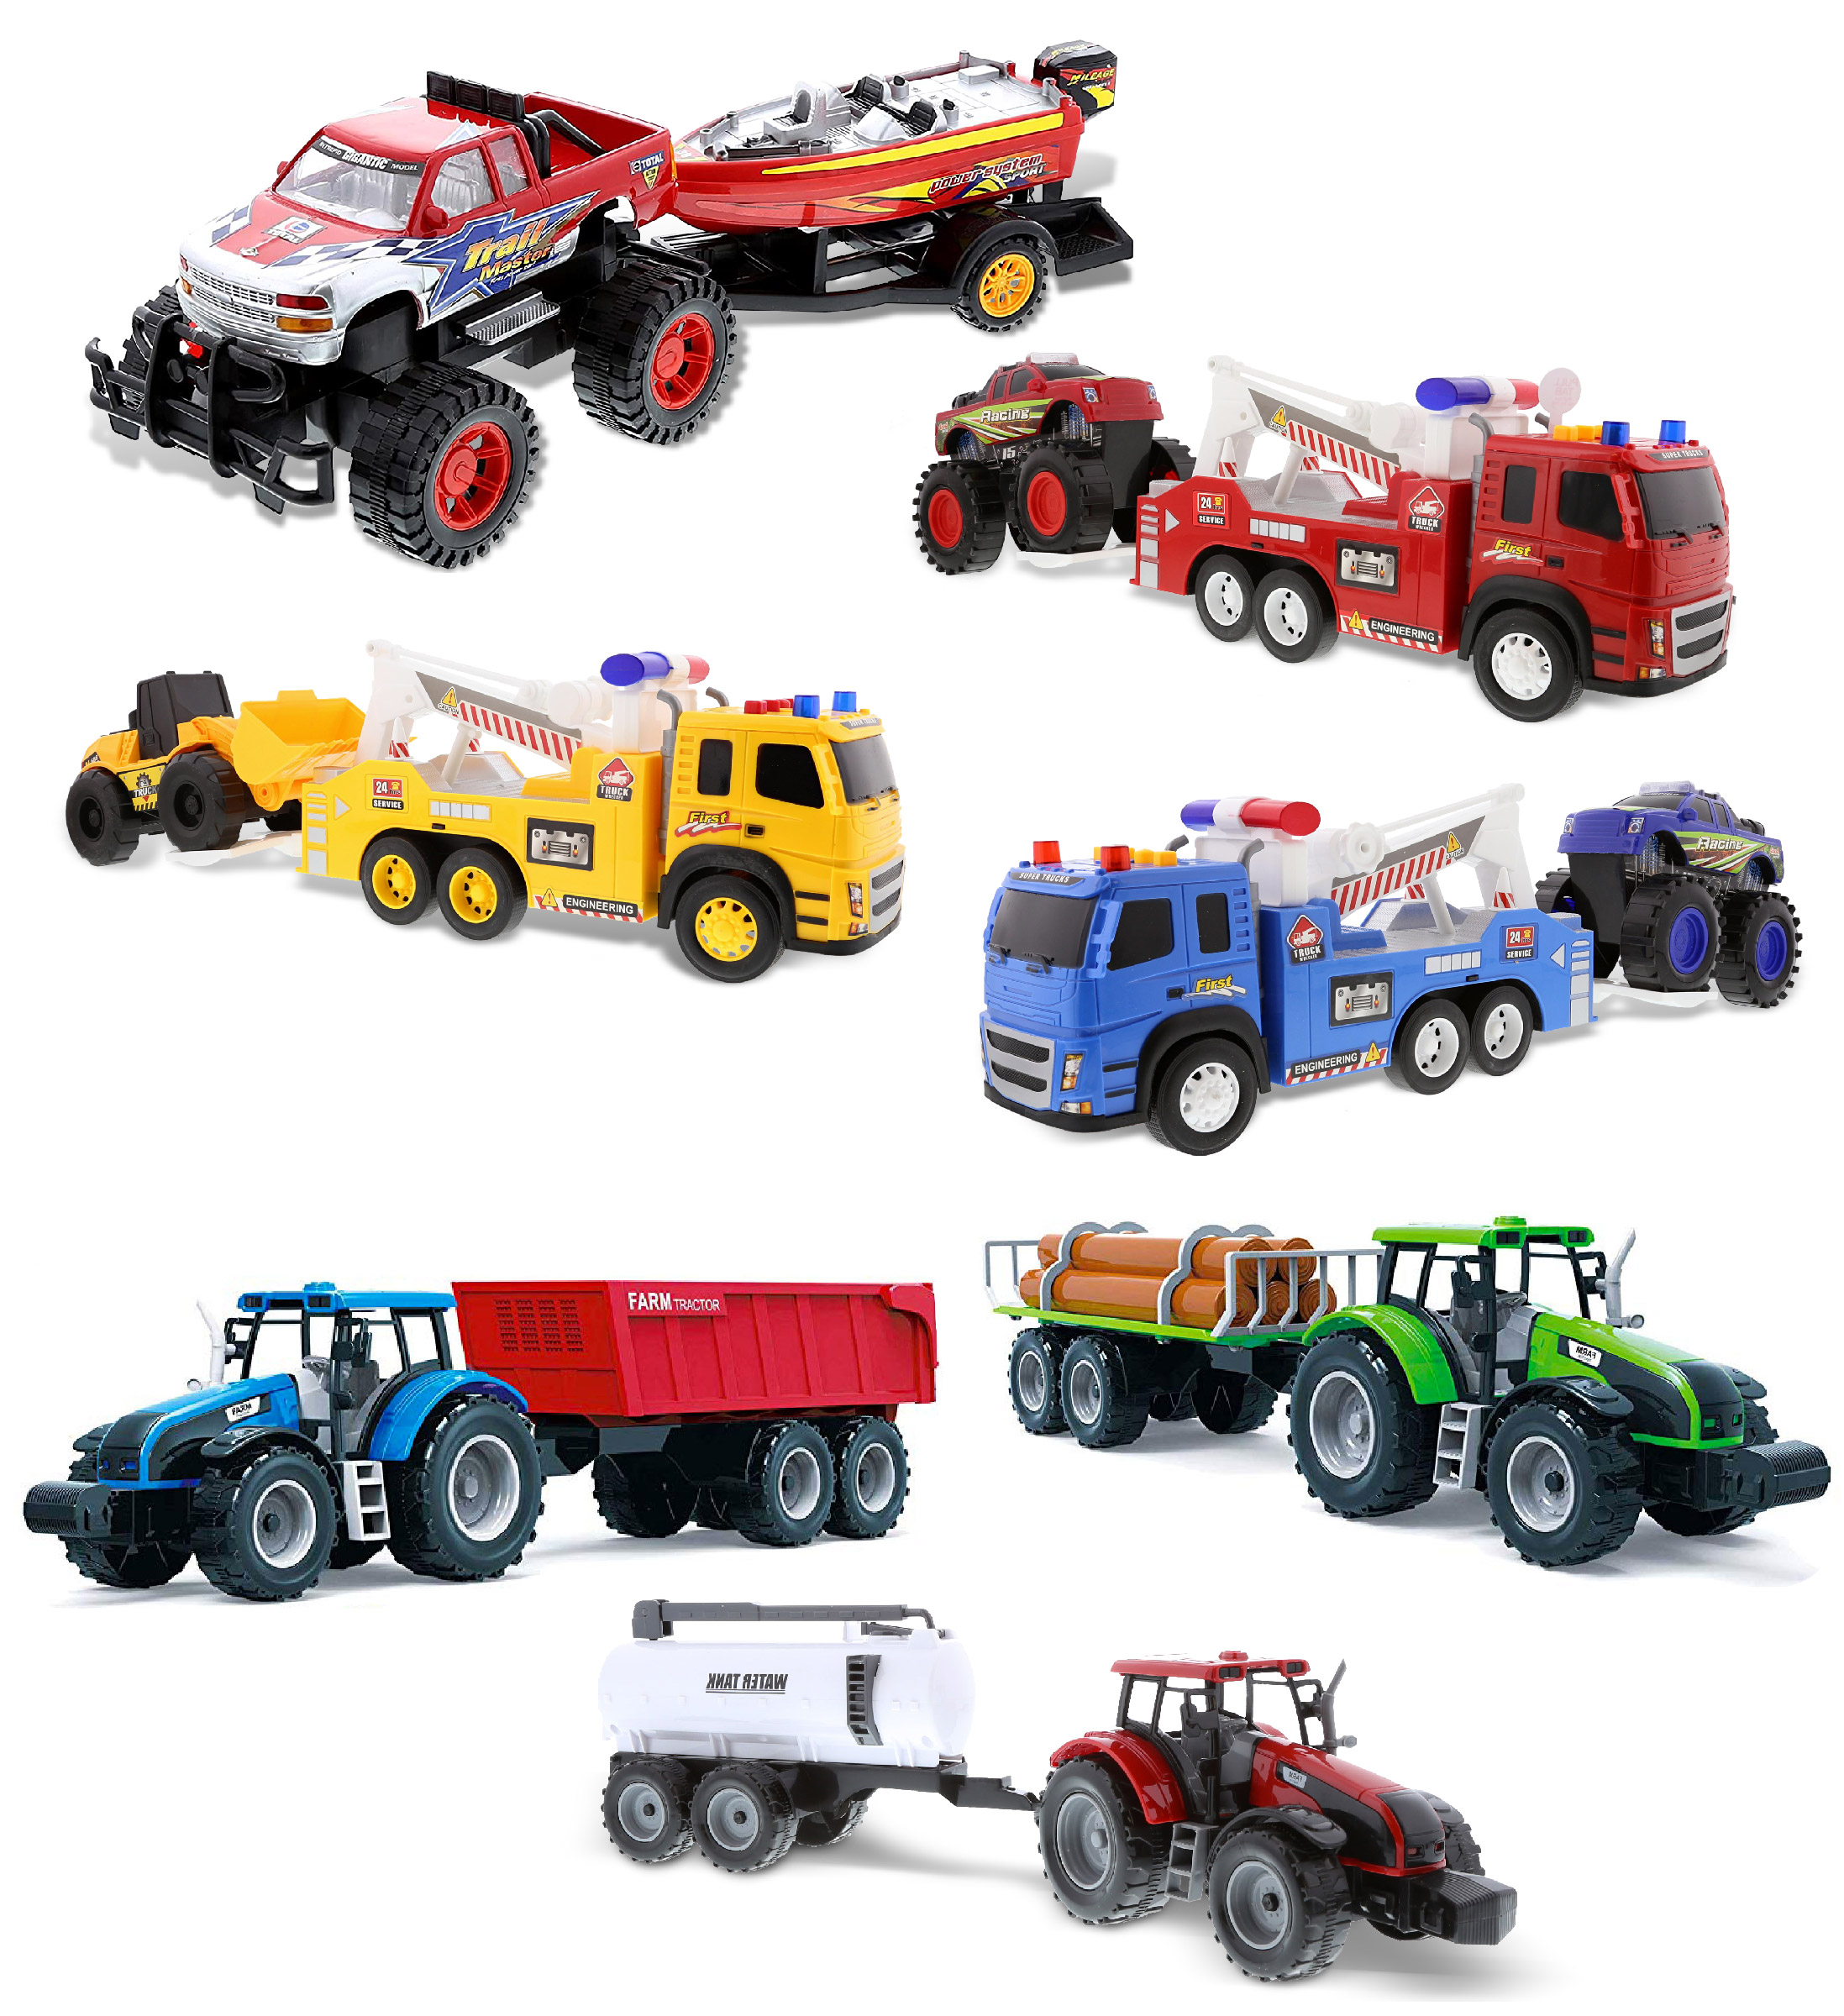 Mozlly Friction Powered Truck Toy Set – Includes 1 Monster Pick Up with Speed Boat, 3 Emergency Tow Trucks with Racing Trucks and 3 Farm Vehicles with Water Tank, Log Hauler, Tractor – Styles Vary - image 1 of 7